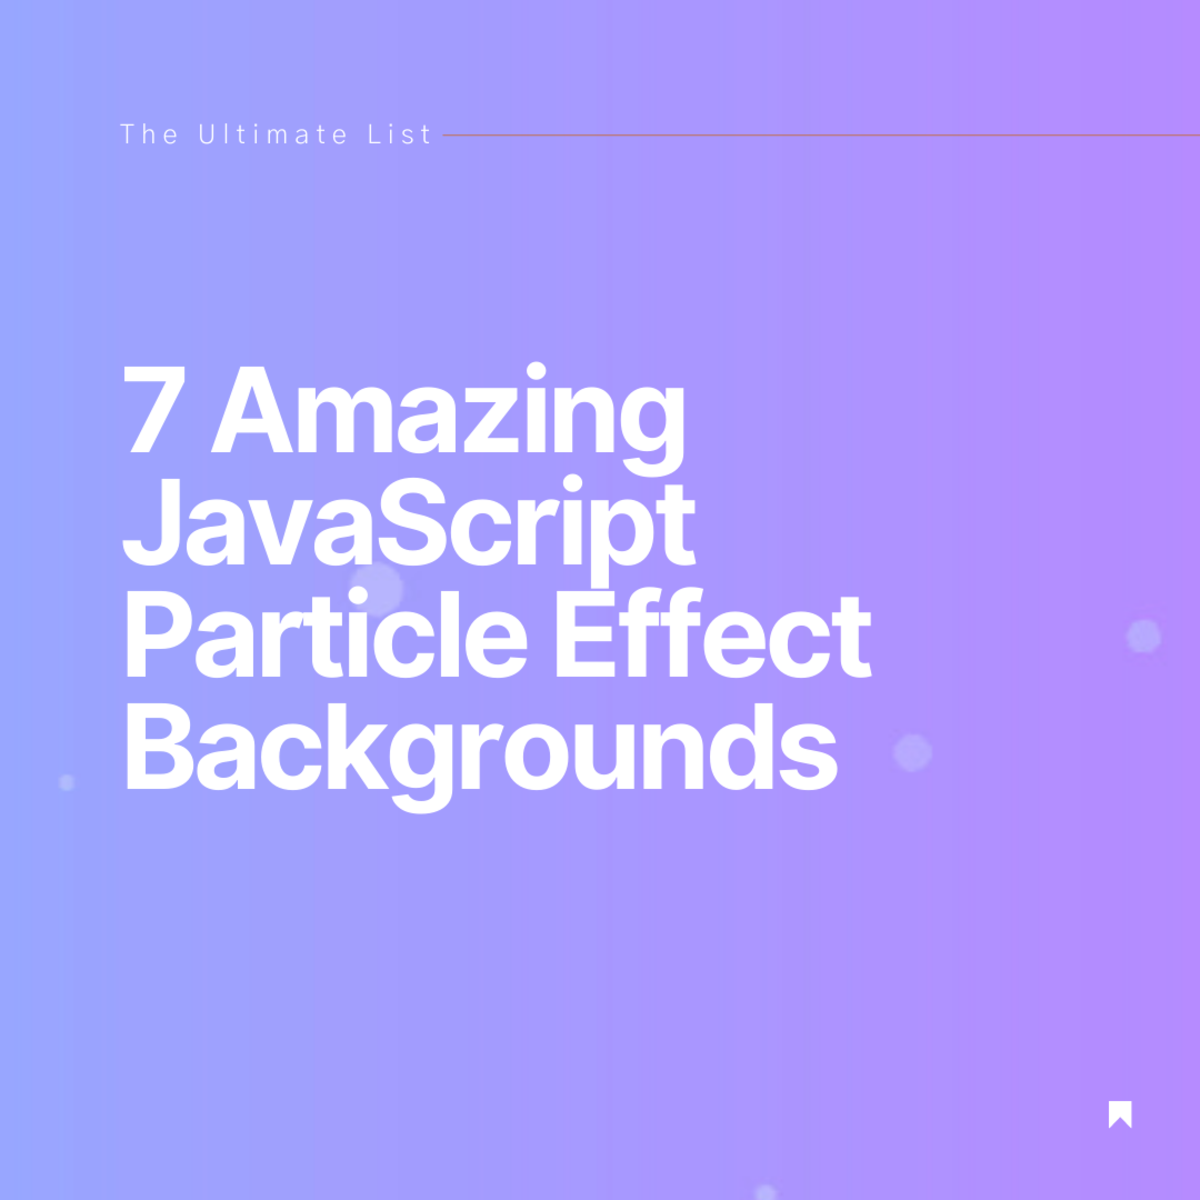 7 Best JavaScript Particle Effect Backgrounds: The Ultimate List